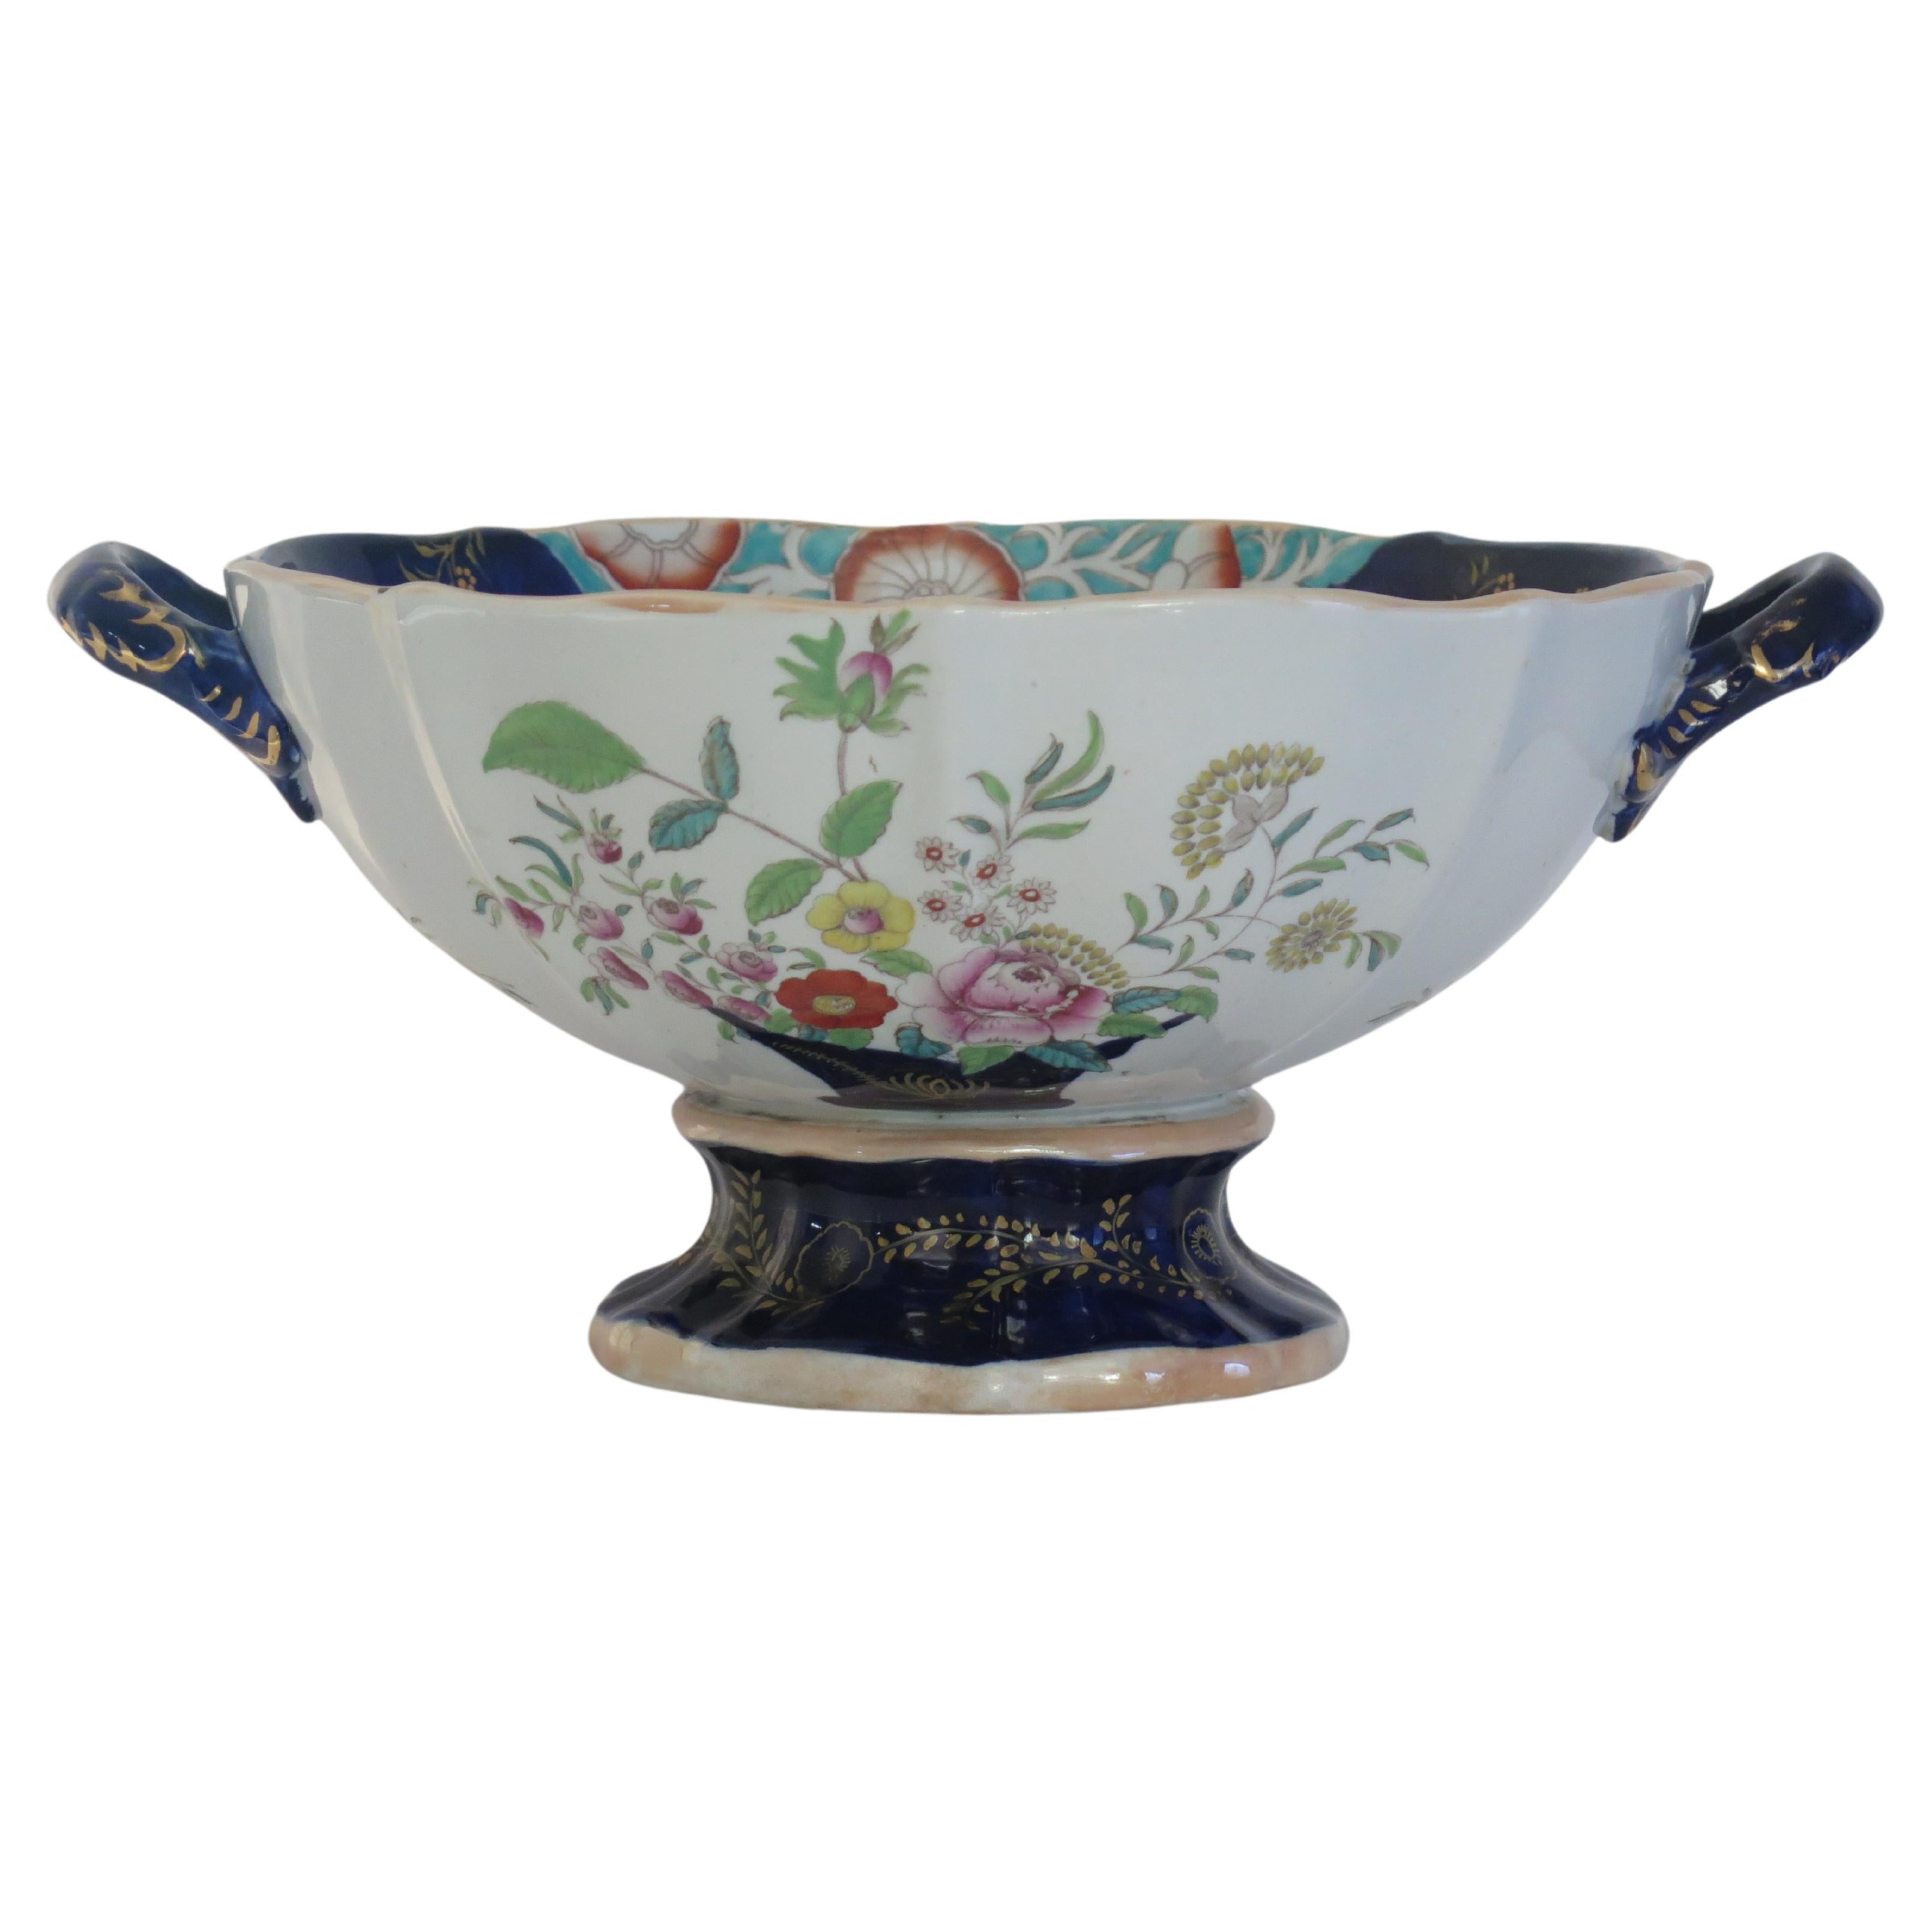 Large Masons Ironstone Punch Bowl in Curled Leaf & Flower Basket ptn, circa 1838 For Sale